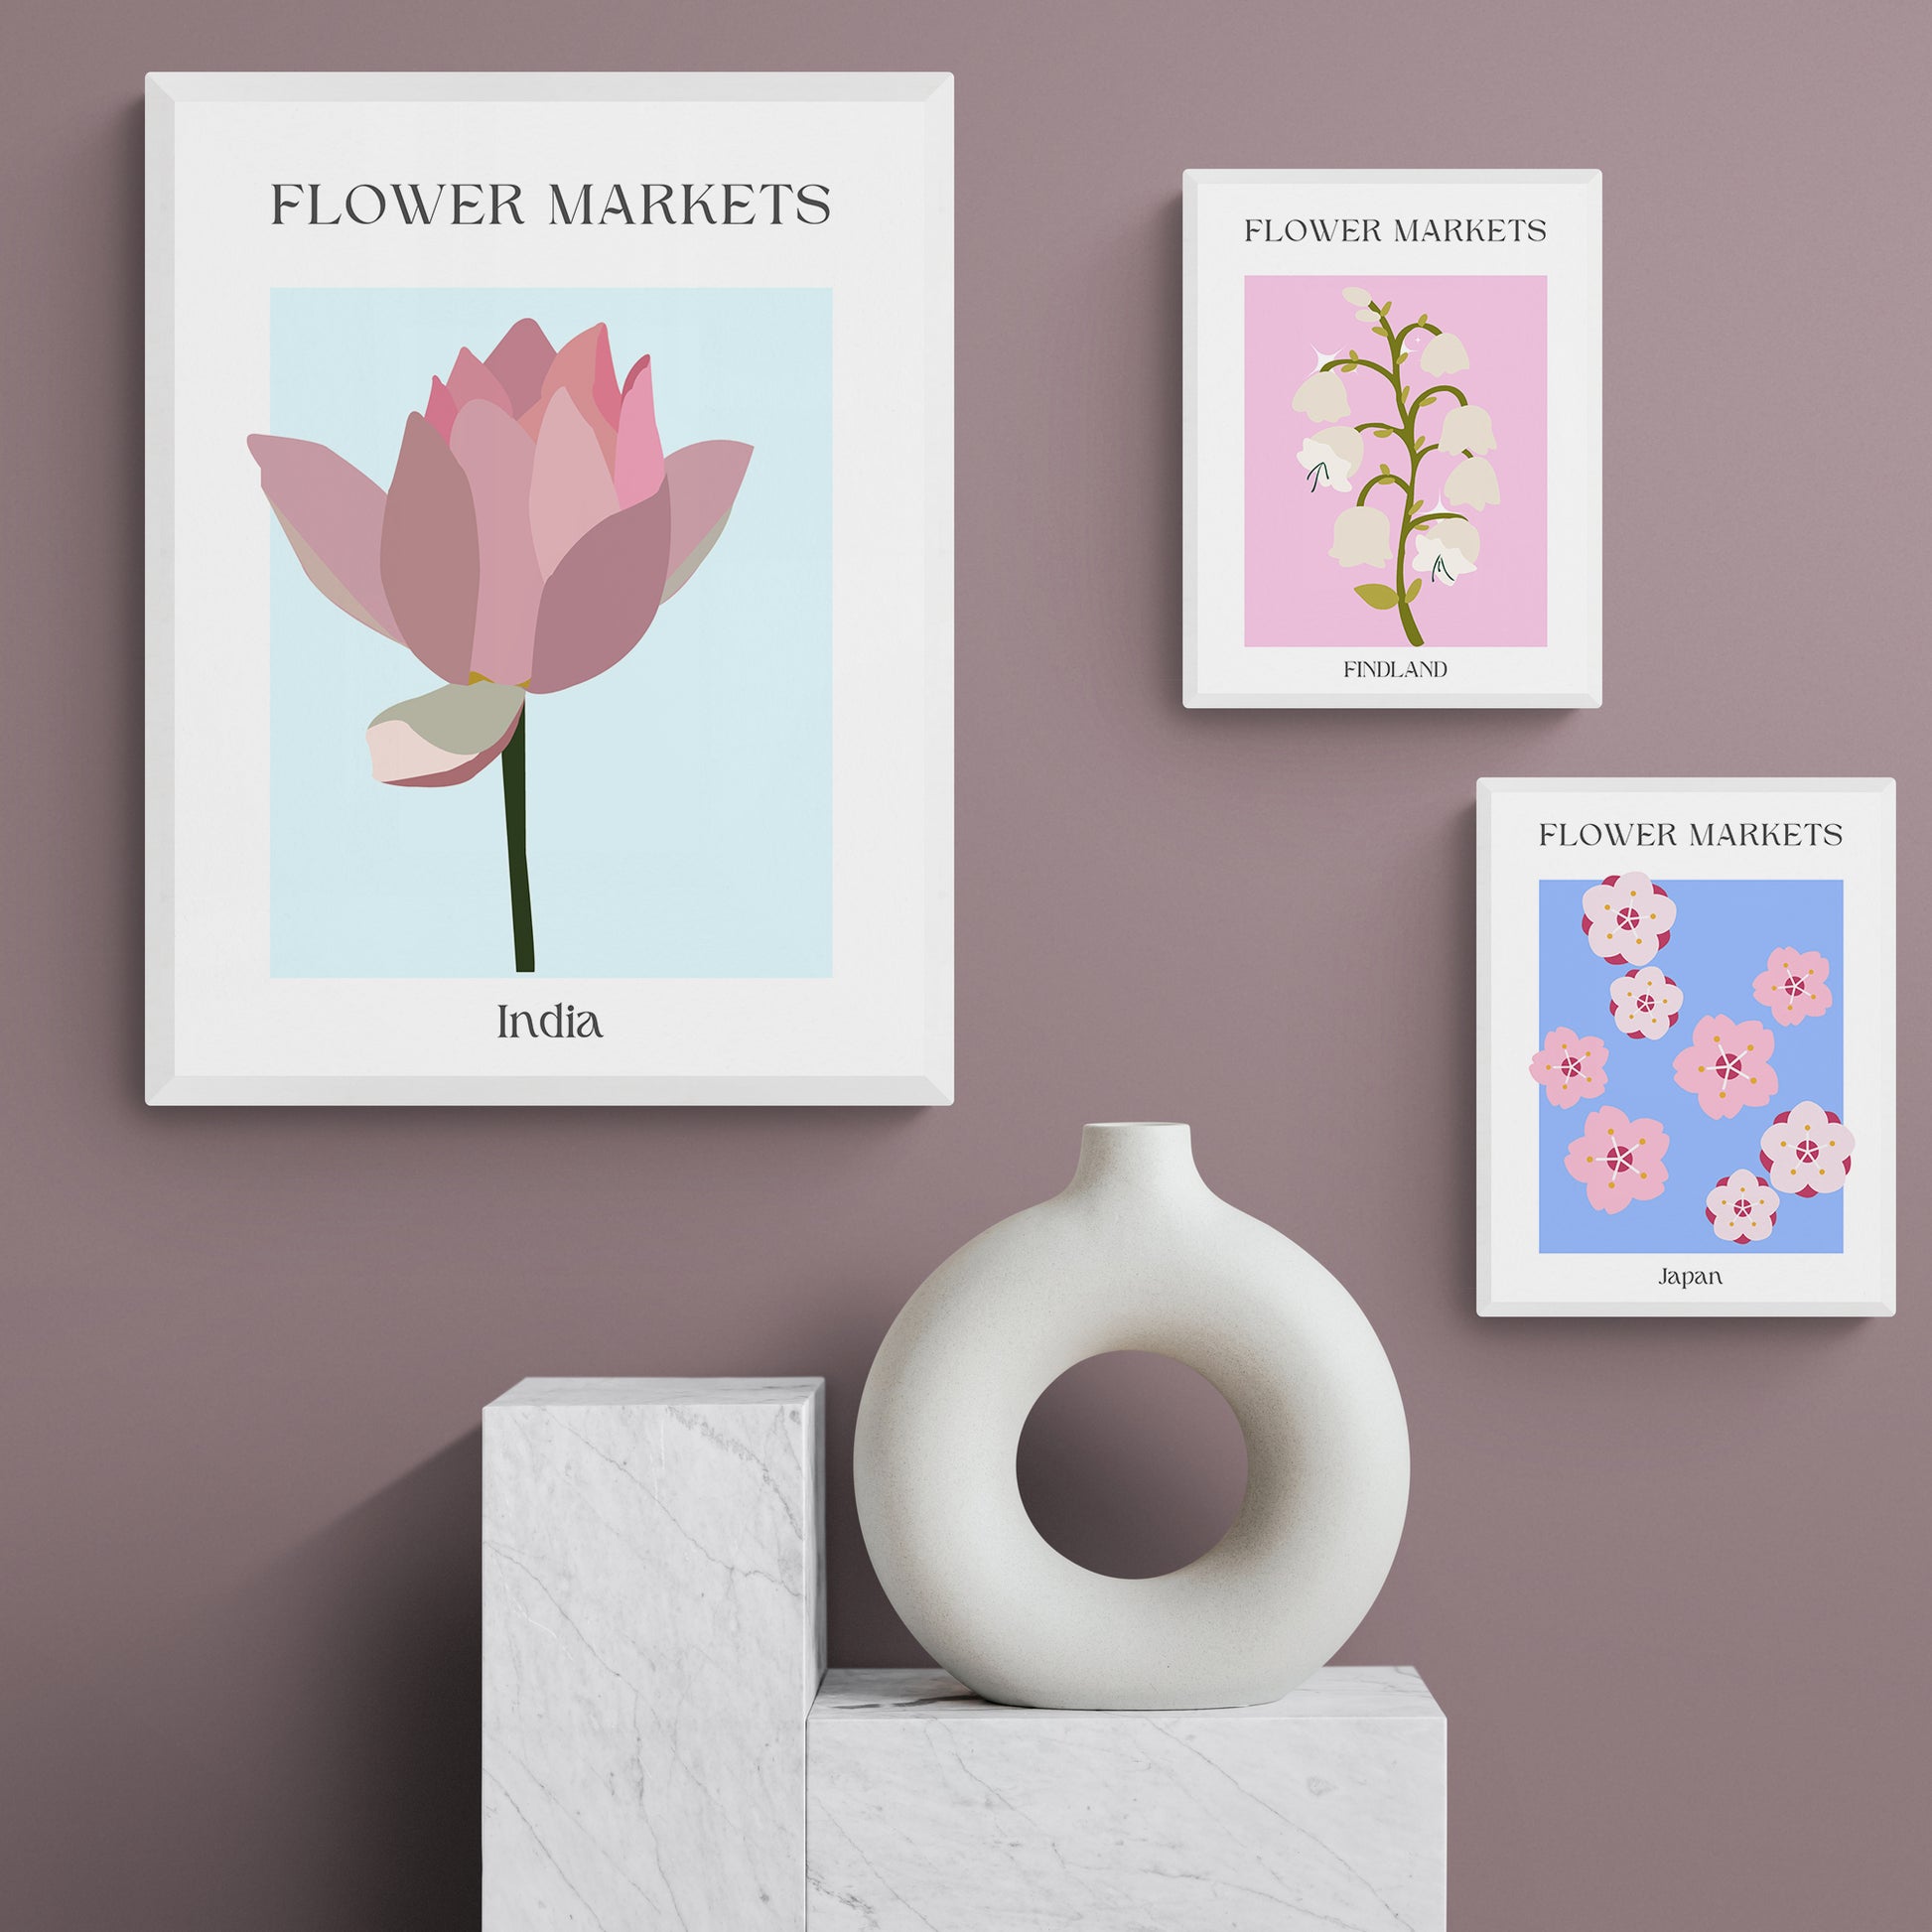 Bring elegant style to your home with this Hong Kong Flowers Market Print. Featuring vibrant designs with kitchen art, contemporary art, and wall art ideas for your living room, this poster is a great way to upgrade your space with classic Scandinavian design. With a selection of sizes, you can easily find prints for your bedroom, kitchen, or gallery wall that suit your unique style. Enjoy a chic and modern look with these beautiful posters.